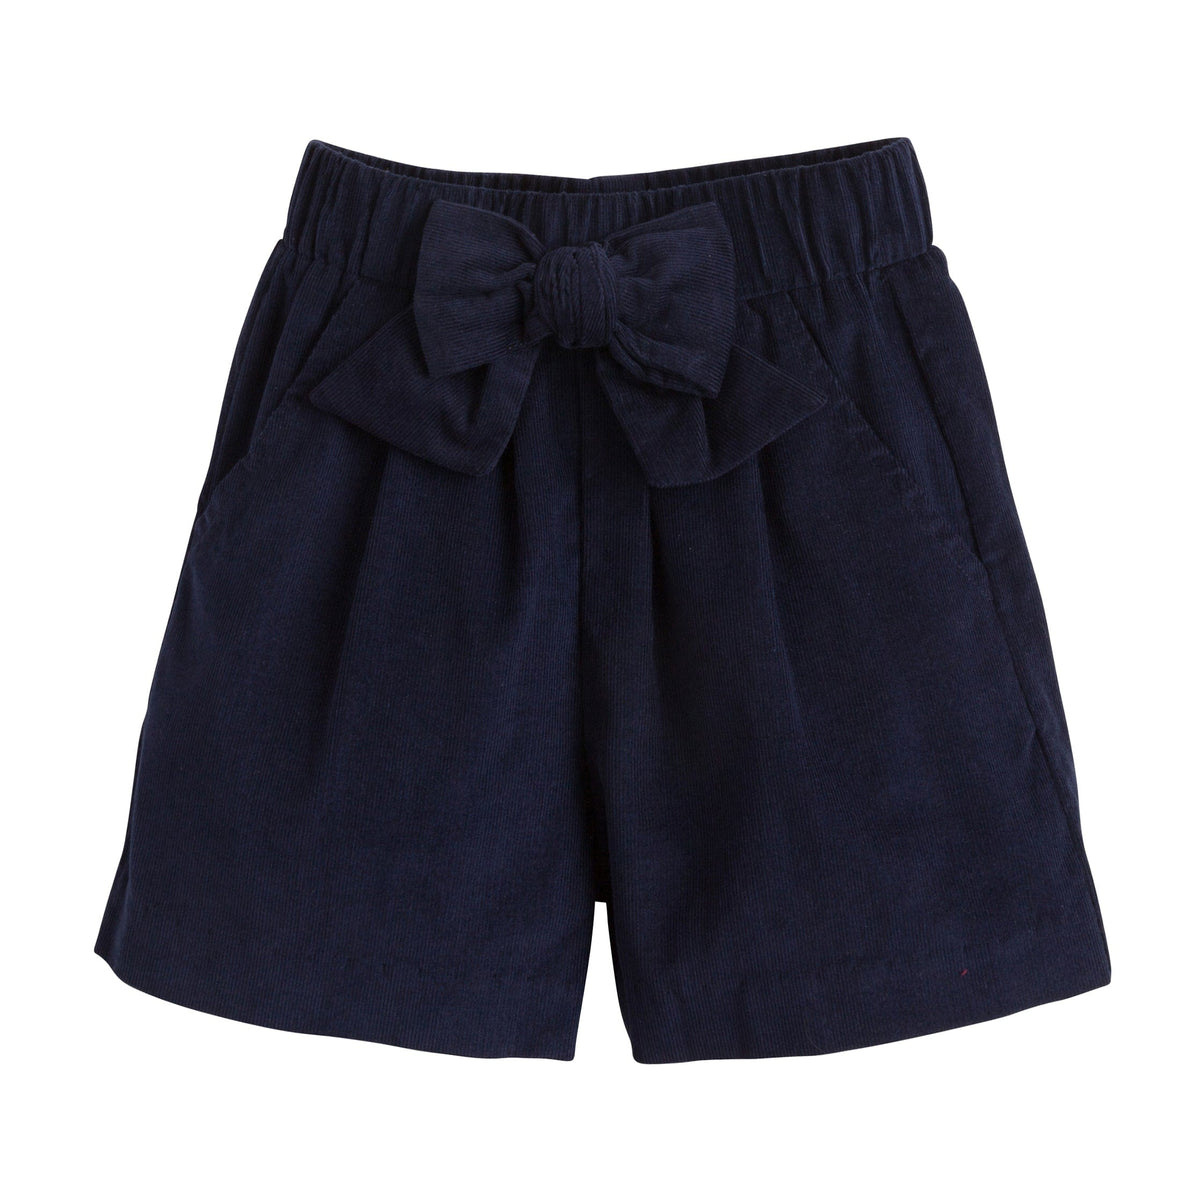 seguridadindustrialcr classic childrens clothing girls navy corduroy shorts with bow in the front